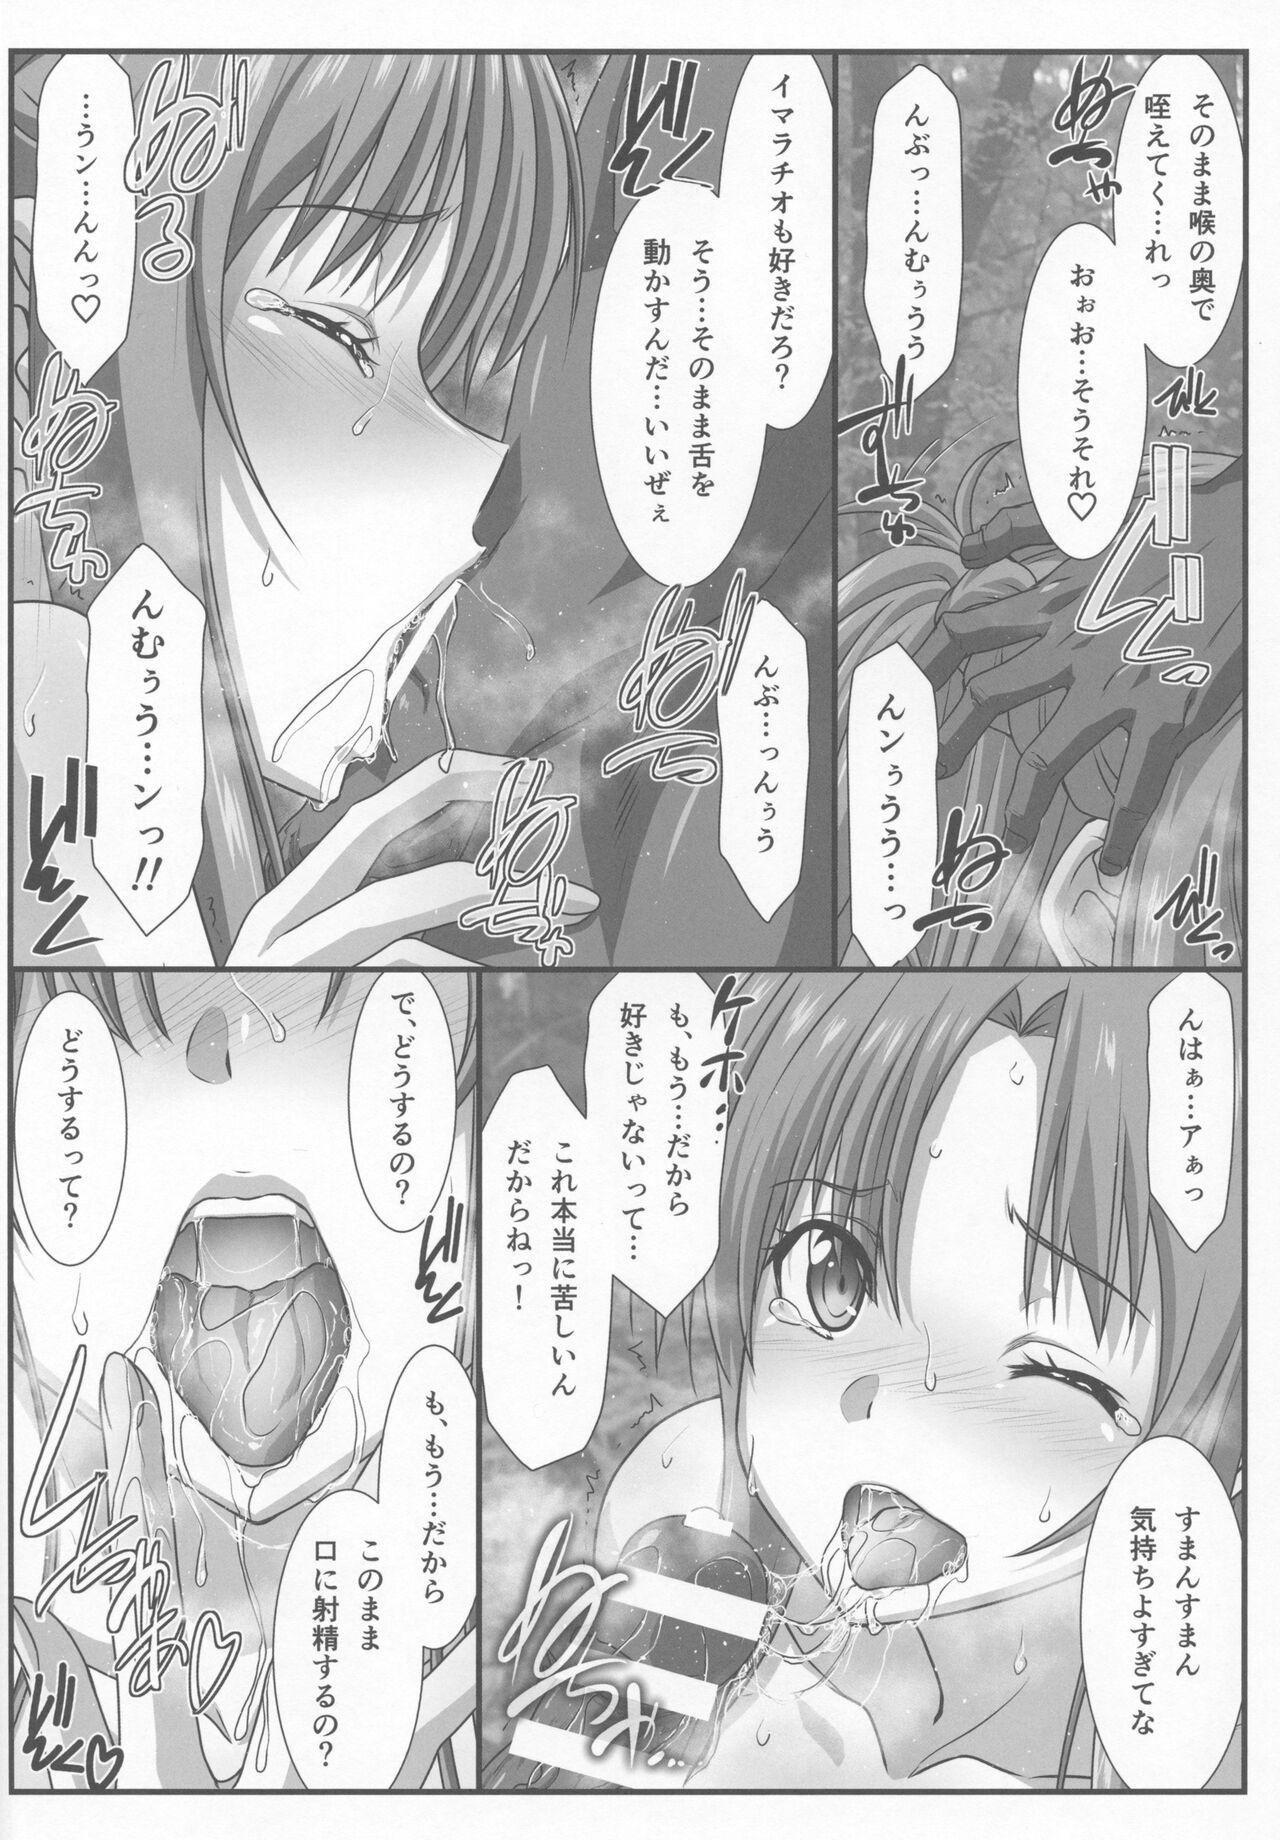 Footjob Astral Bout Ver. 45 - Sword art online Doggy Style - Page 7